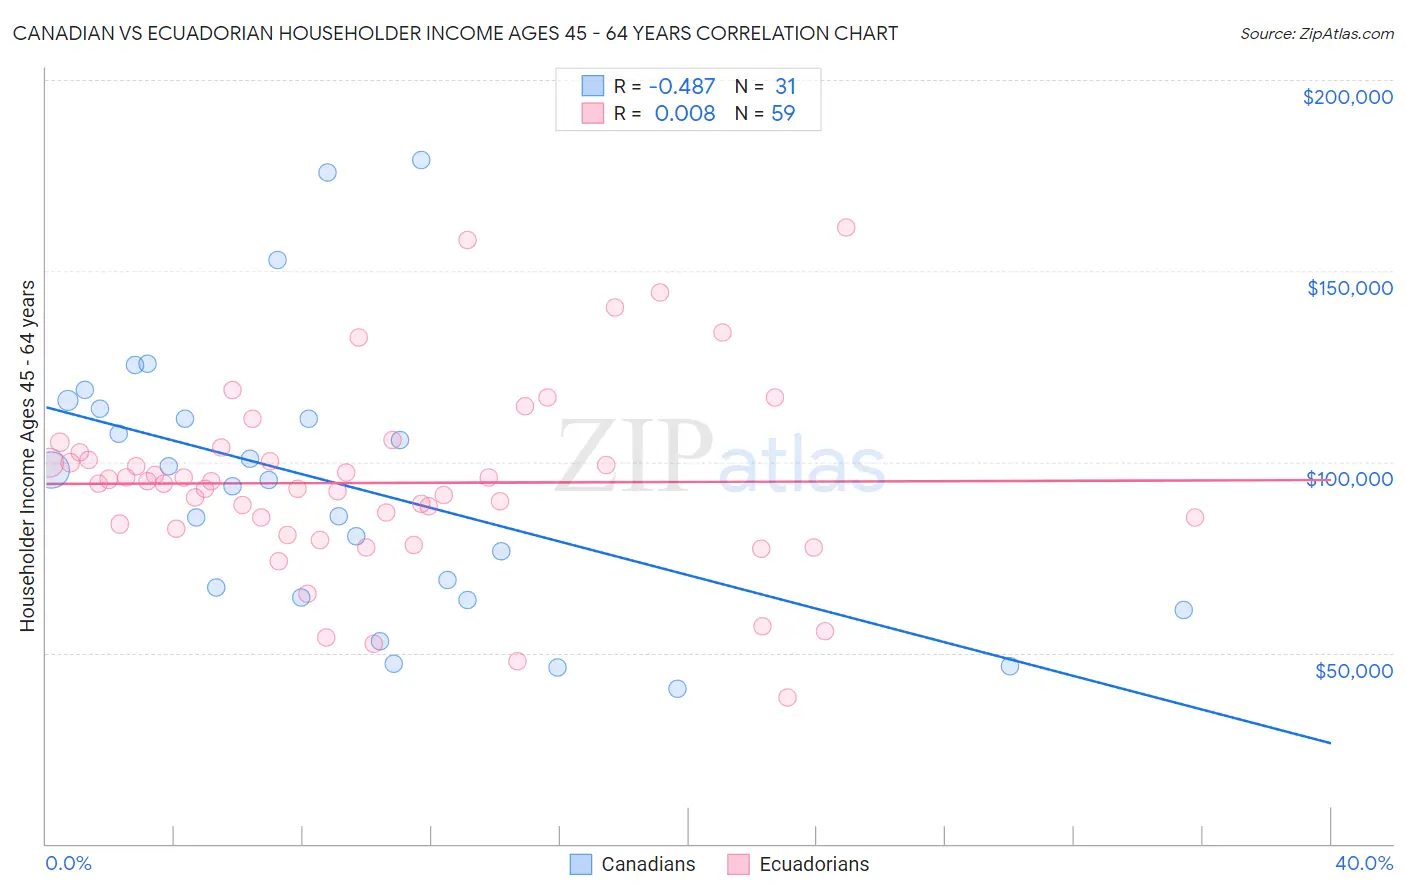 Canadian vs Ecuadorian Householder Income Ages 45 - 64 years